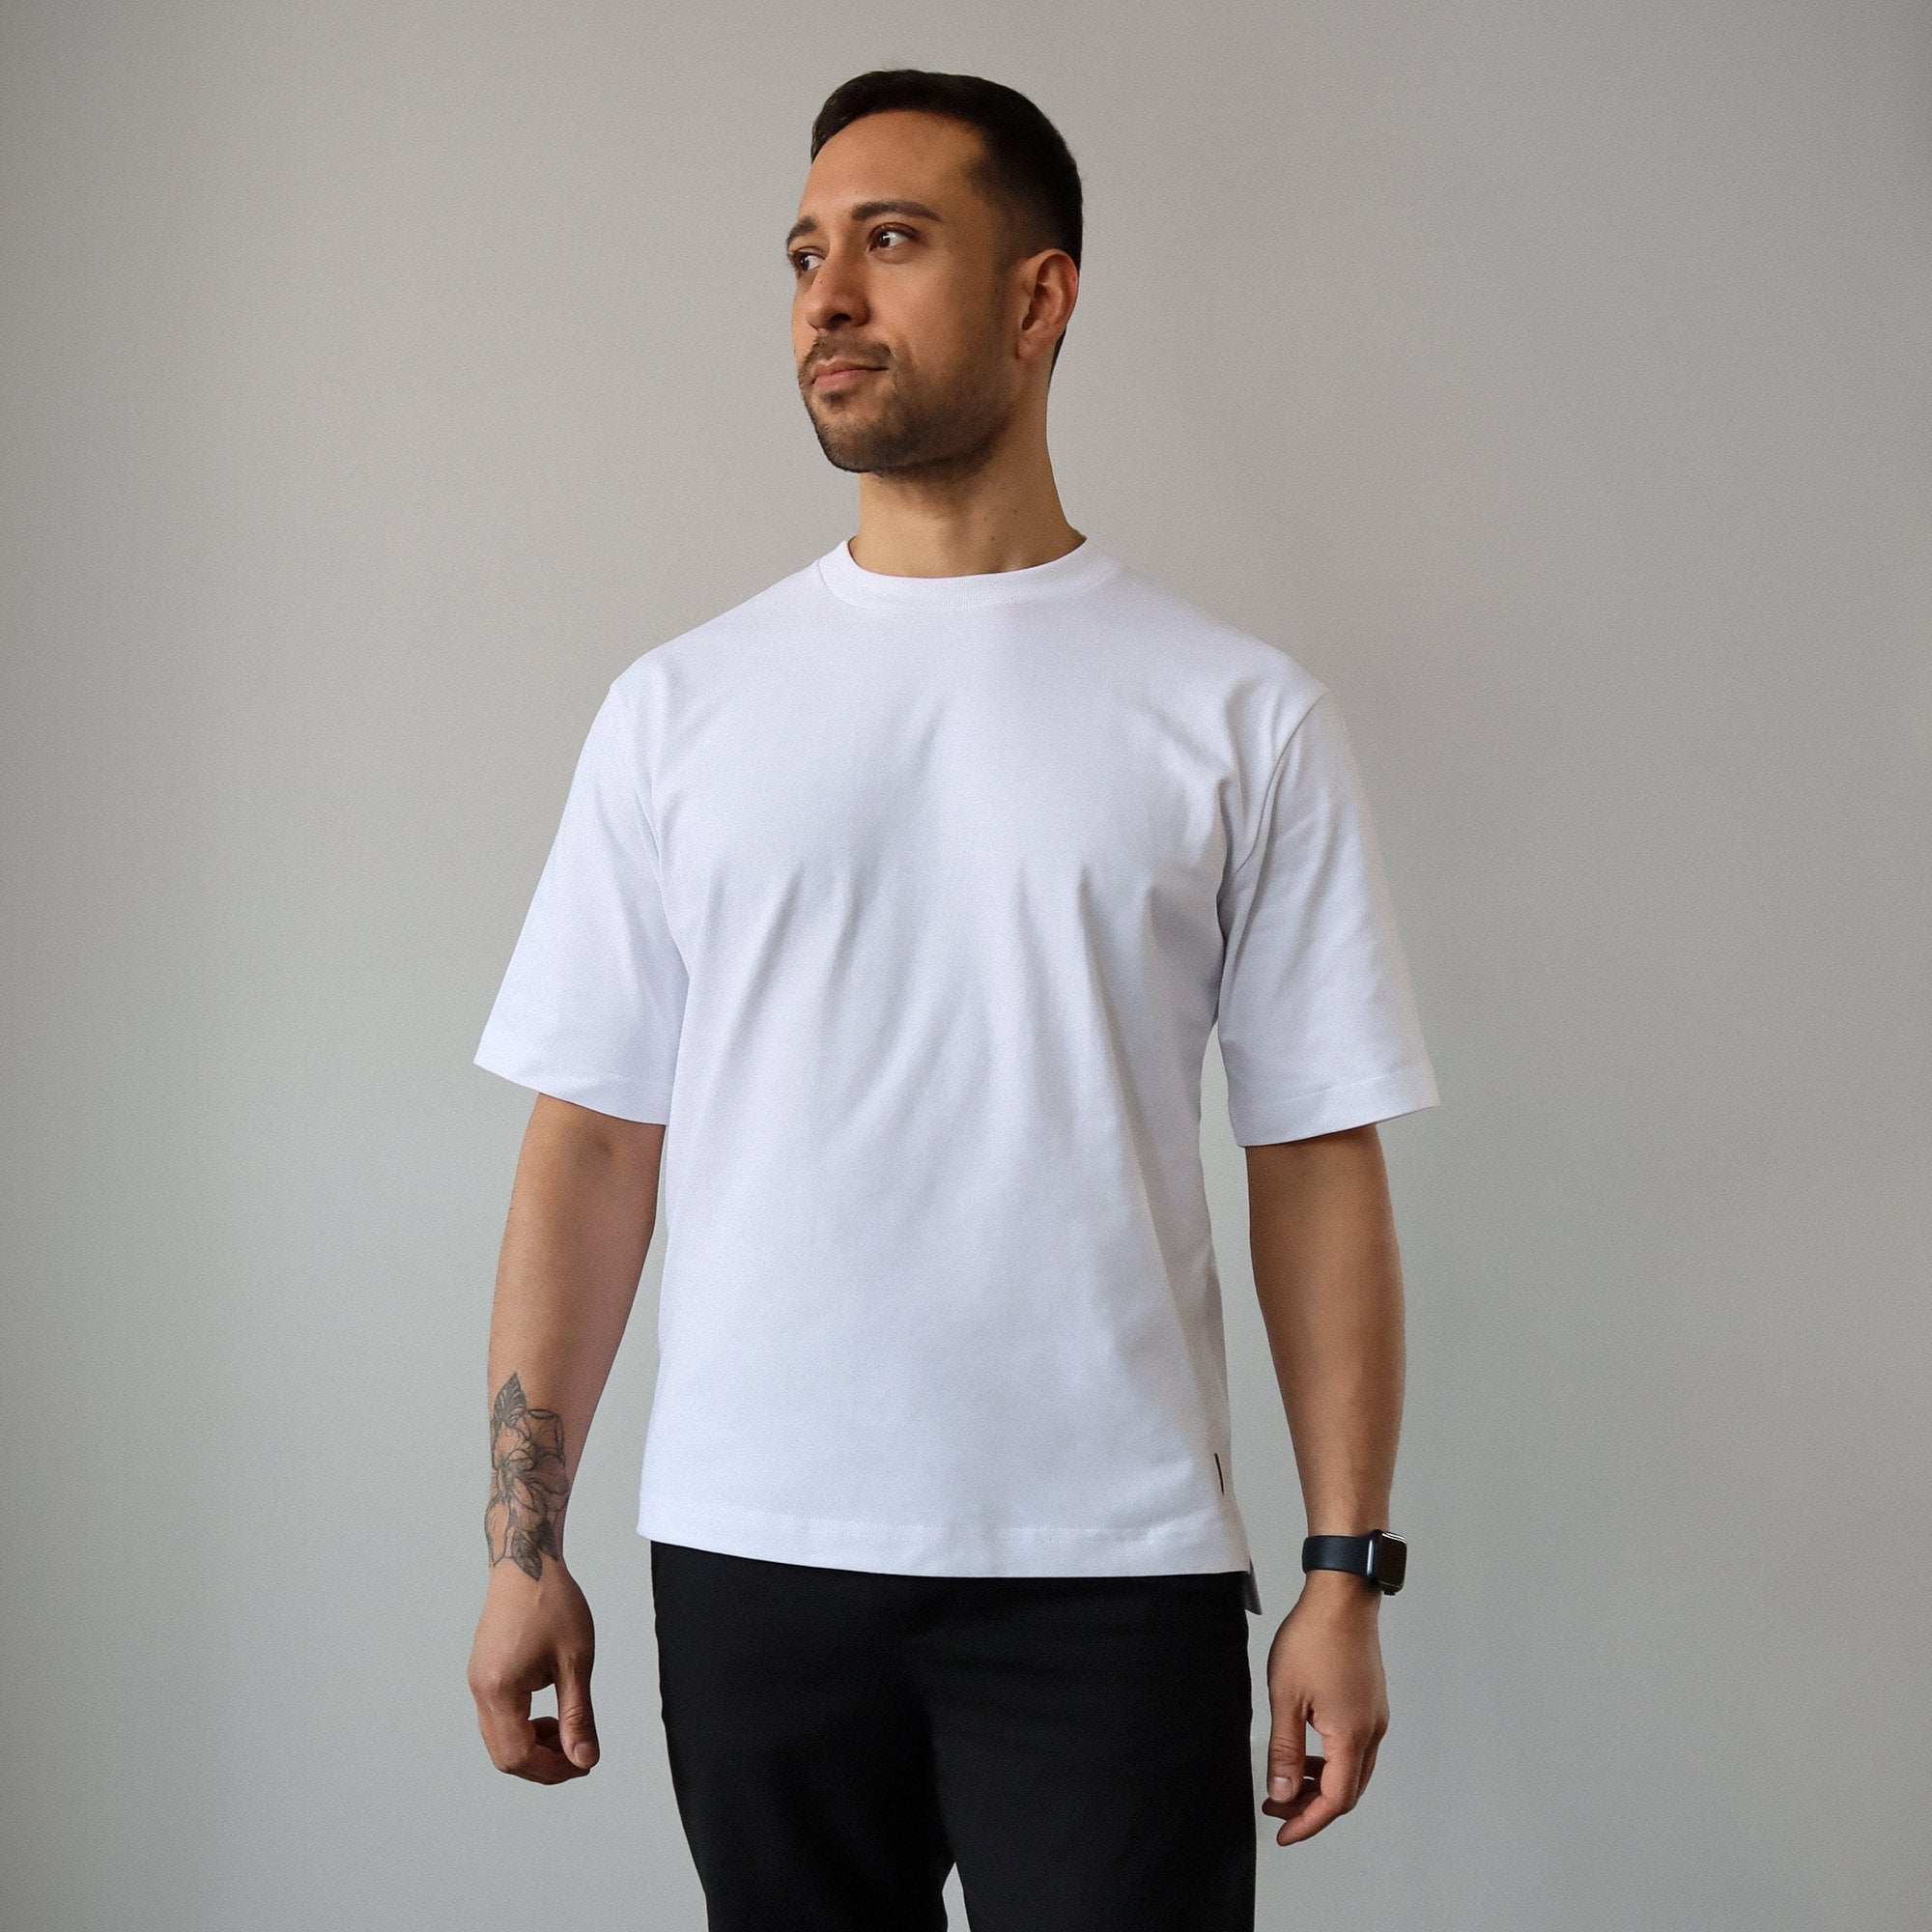 A man stands casually in front of a plain wall, wearing the white Blake tshirt and black pants